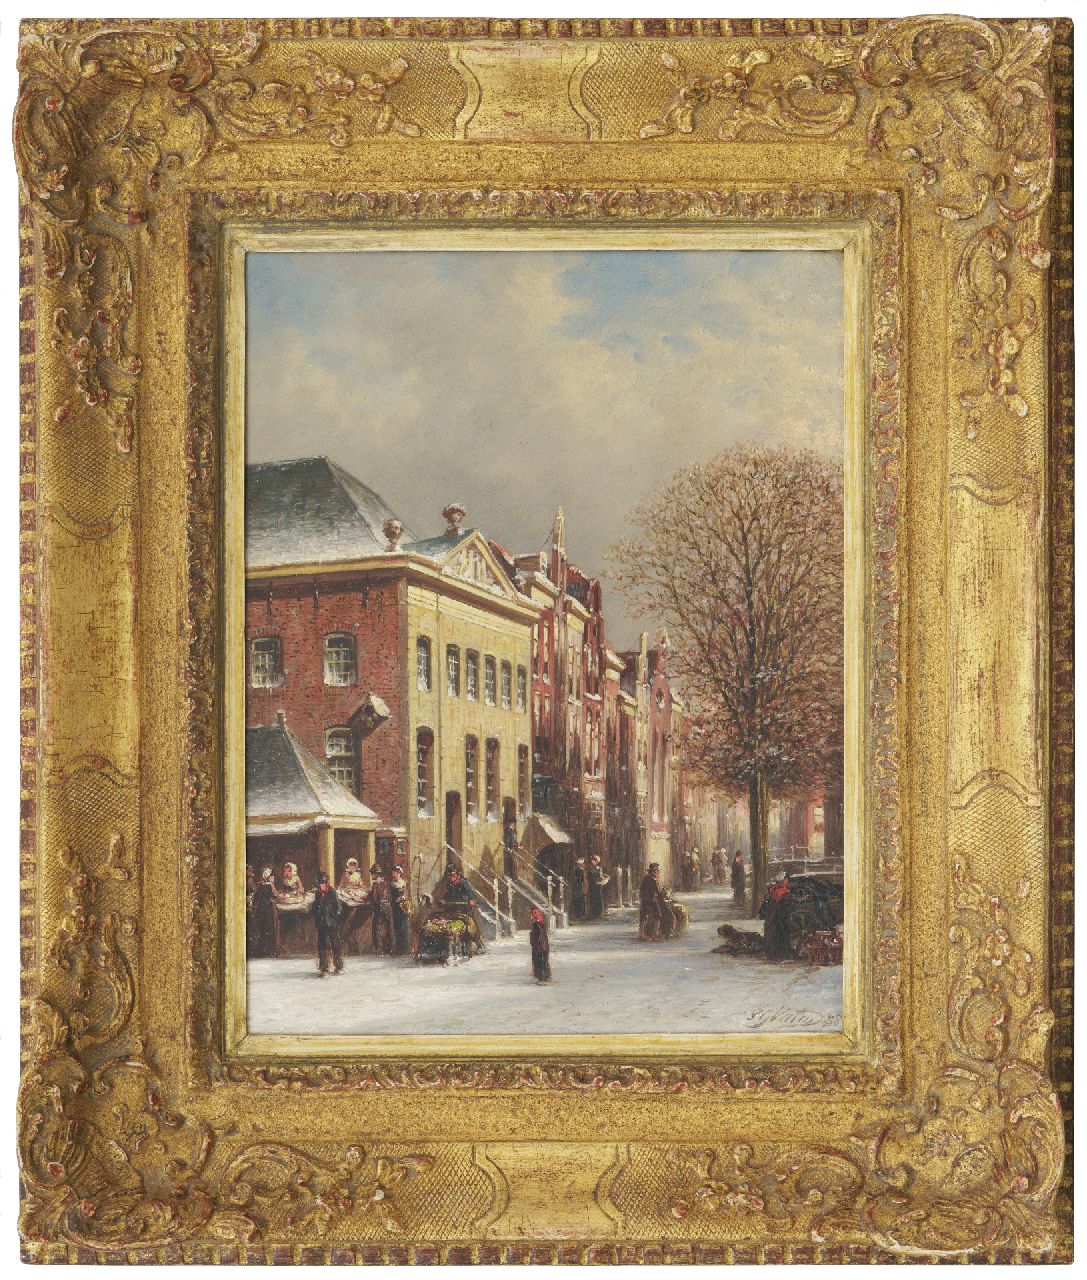 Vertin P.G.  | Petrus Gerardus Vertin | Paintings offered for sale | Wintery street in Delft with the fish banks on the corner with the Voldersgracht, oil on panel 30.8 x 24.3 cm, signed l.r. and dated '88